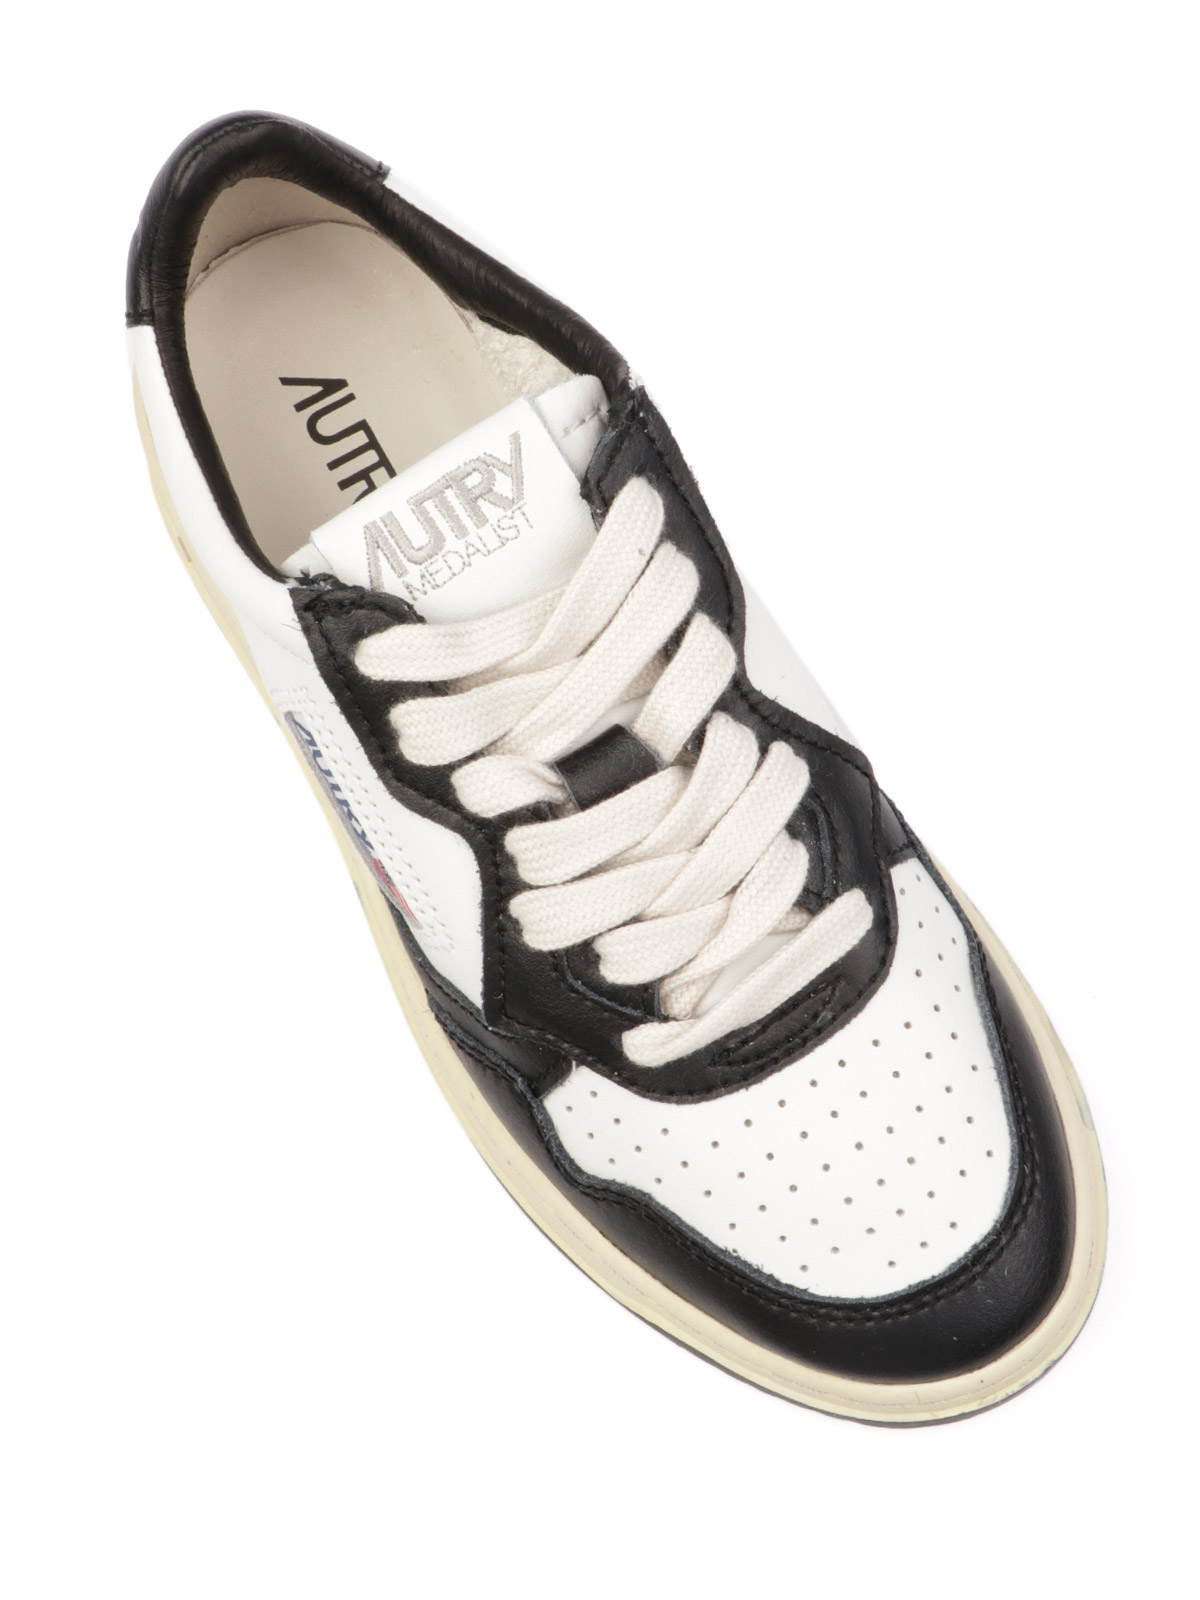 Picture of AUTRY | Women's Medalist Low Biccolor Leather Sneakers